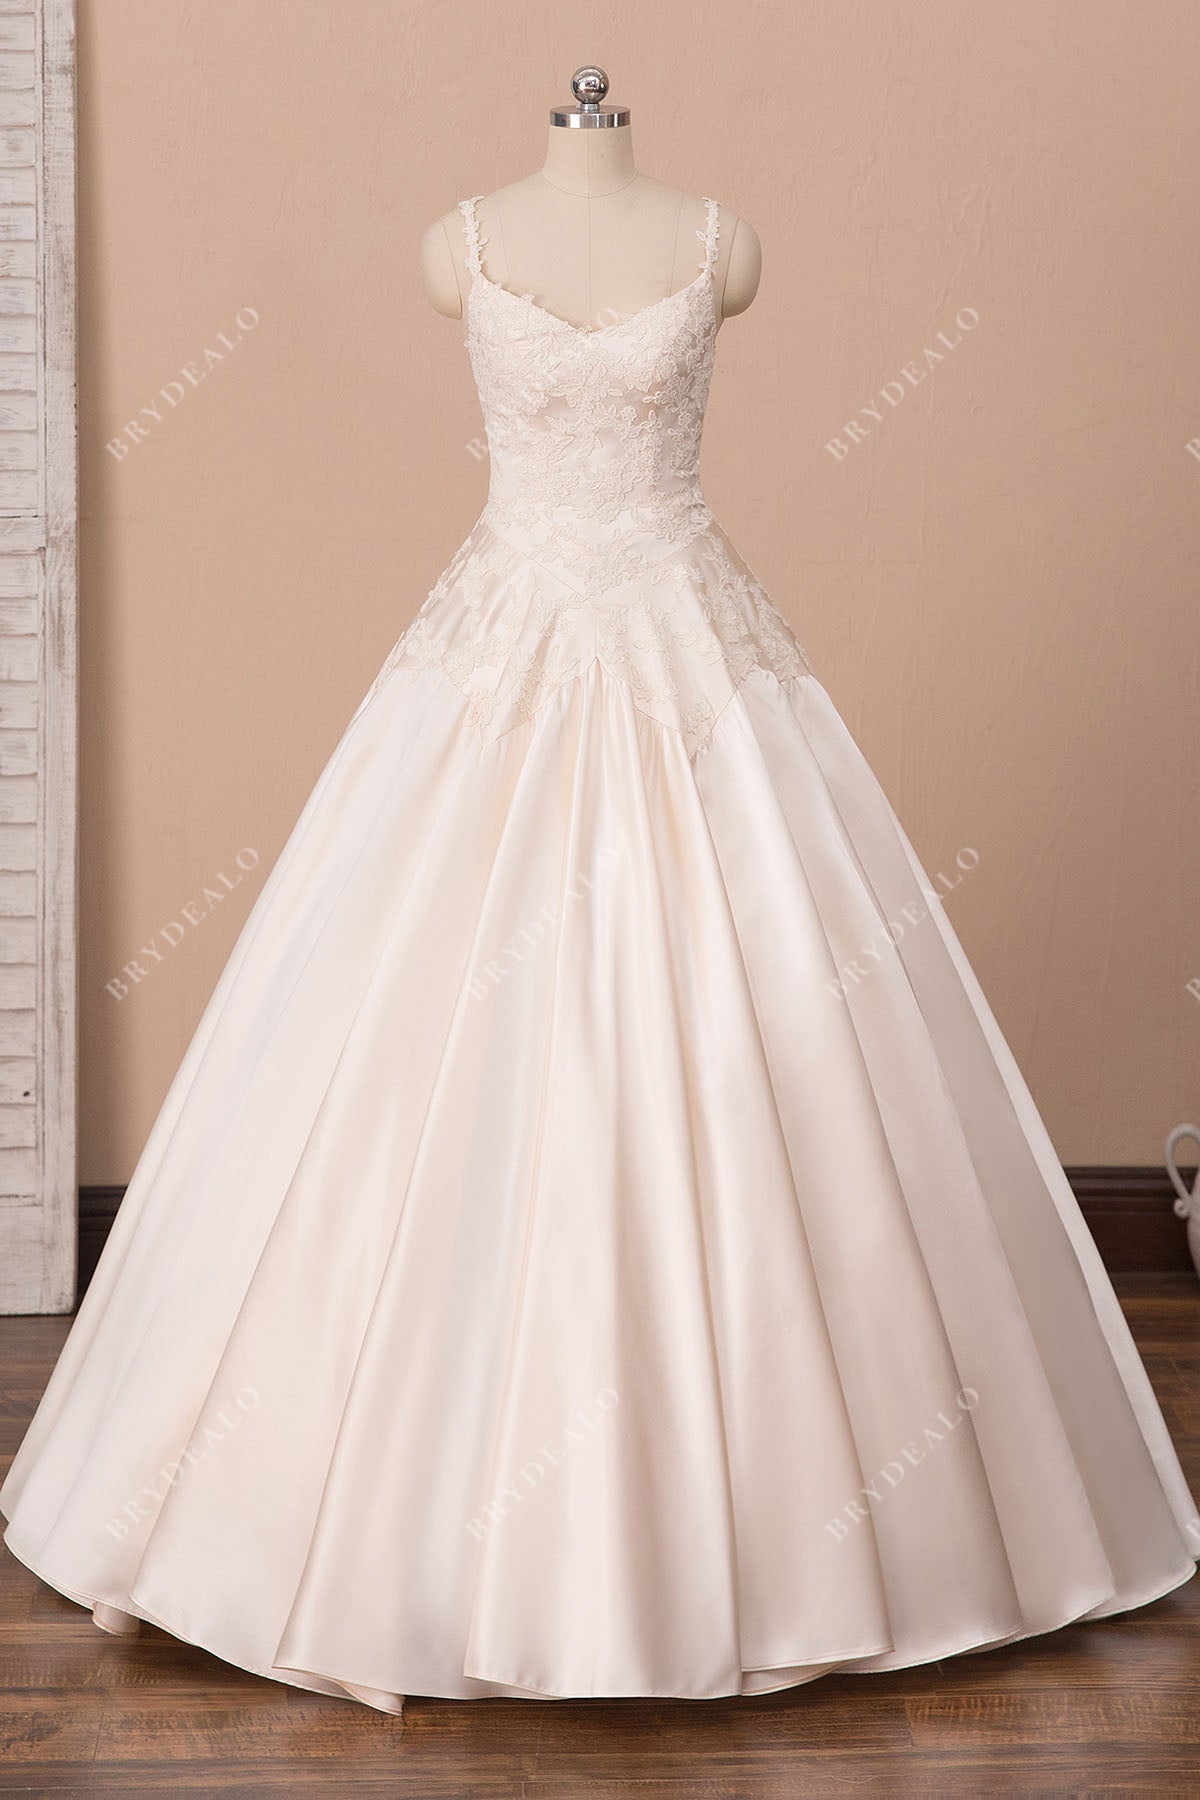 Retro Light Champagne Floor Length Lace Satin Bridal Ball Gown